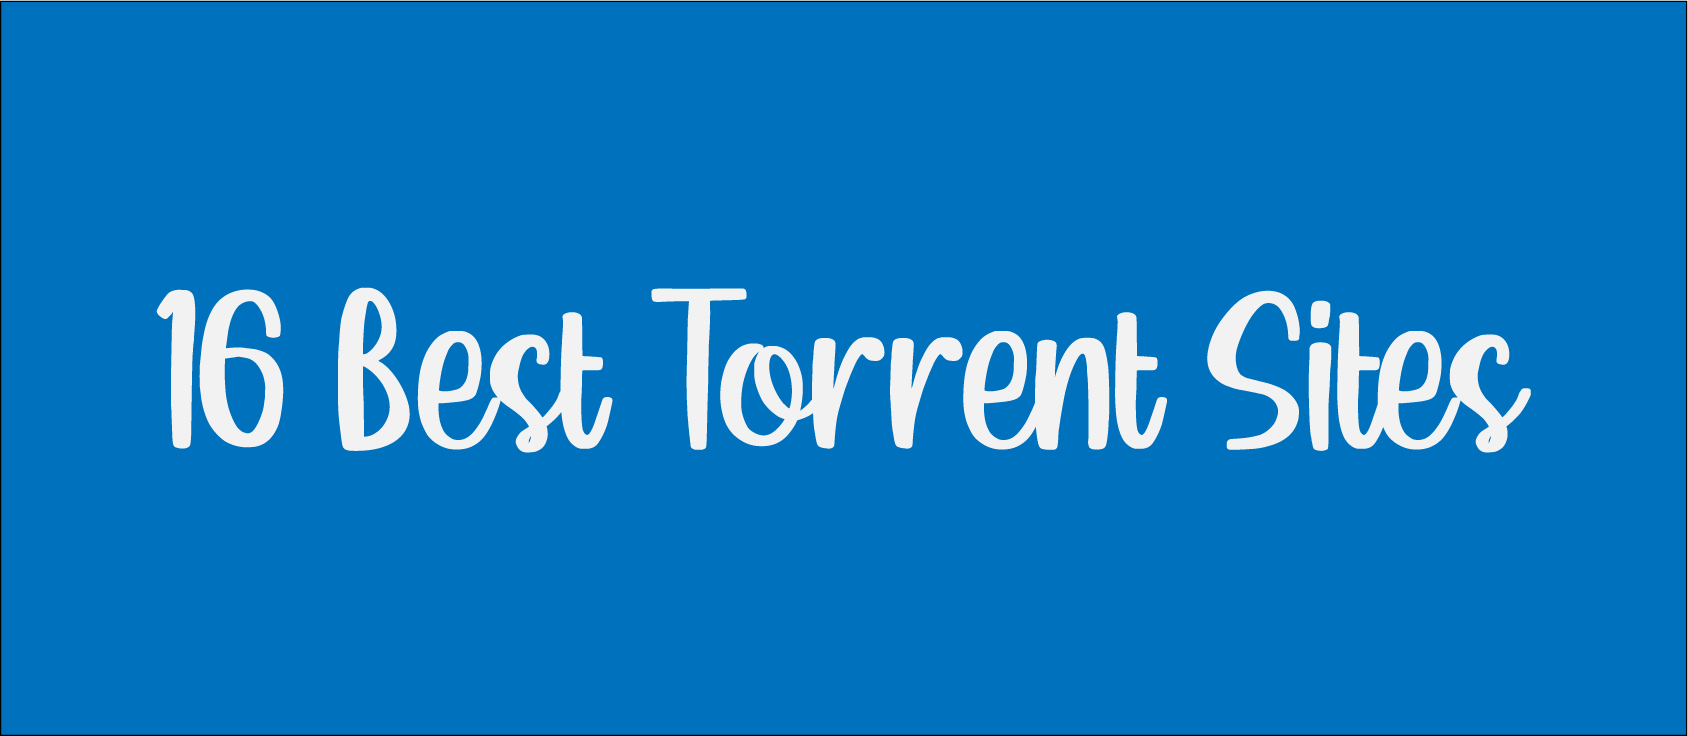 lost in yaba - 1337x Torrents